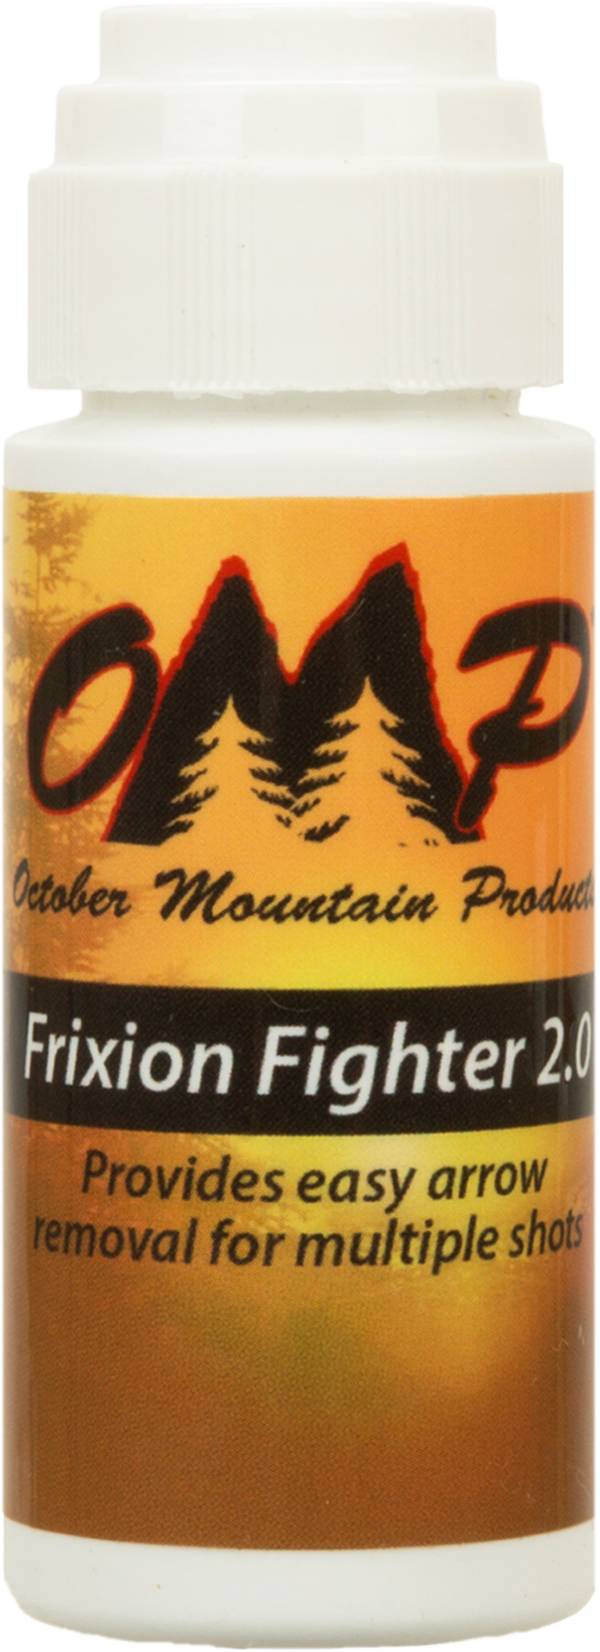 OMP FriXion Fighter 2.0 Arrow Lube product image